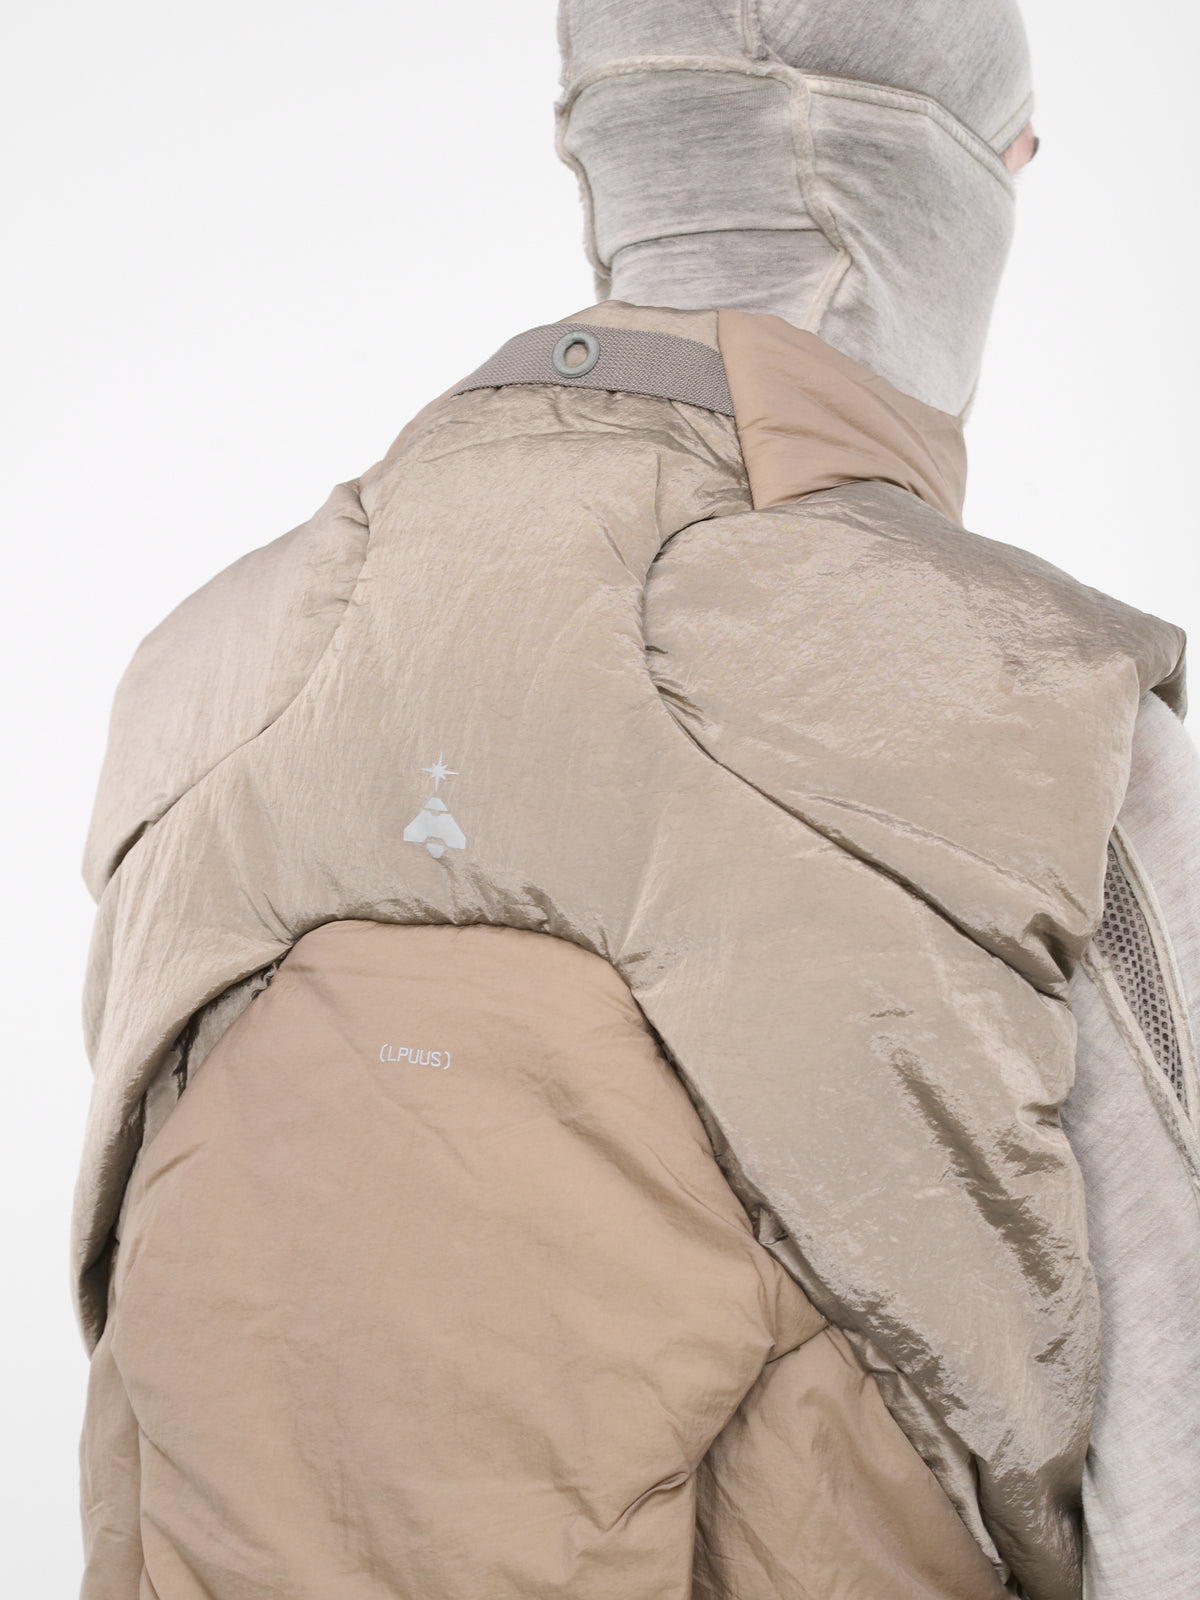 'Scars' Overlapping Tactical Vest (HM02923-1-GG-LIGHT-BROWN)